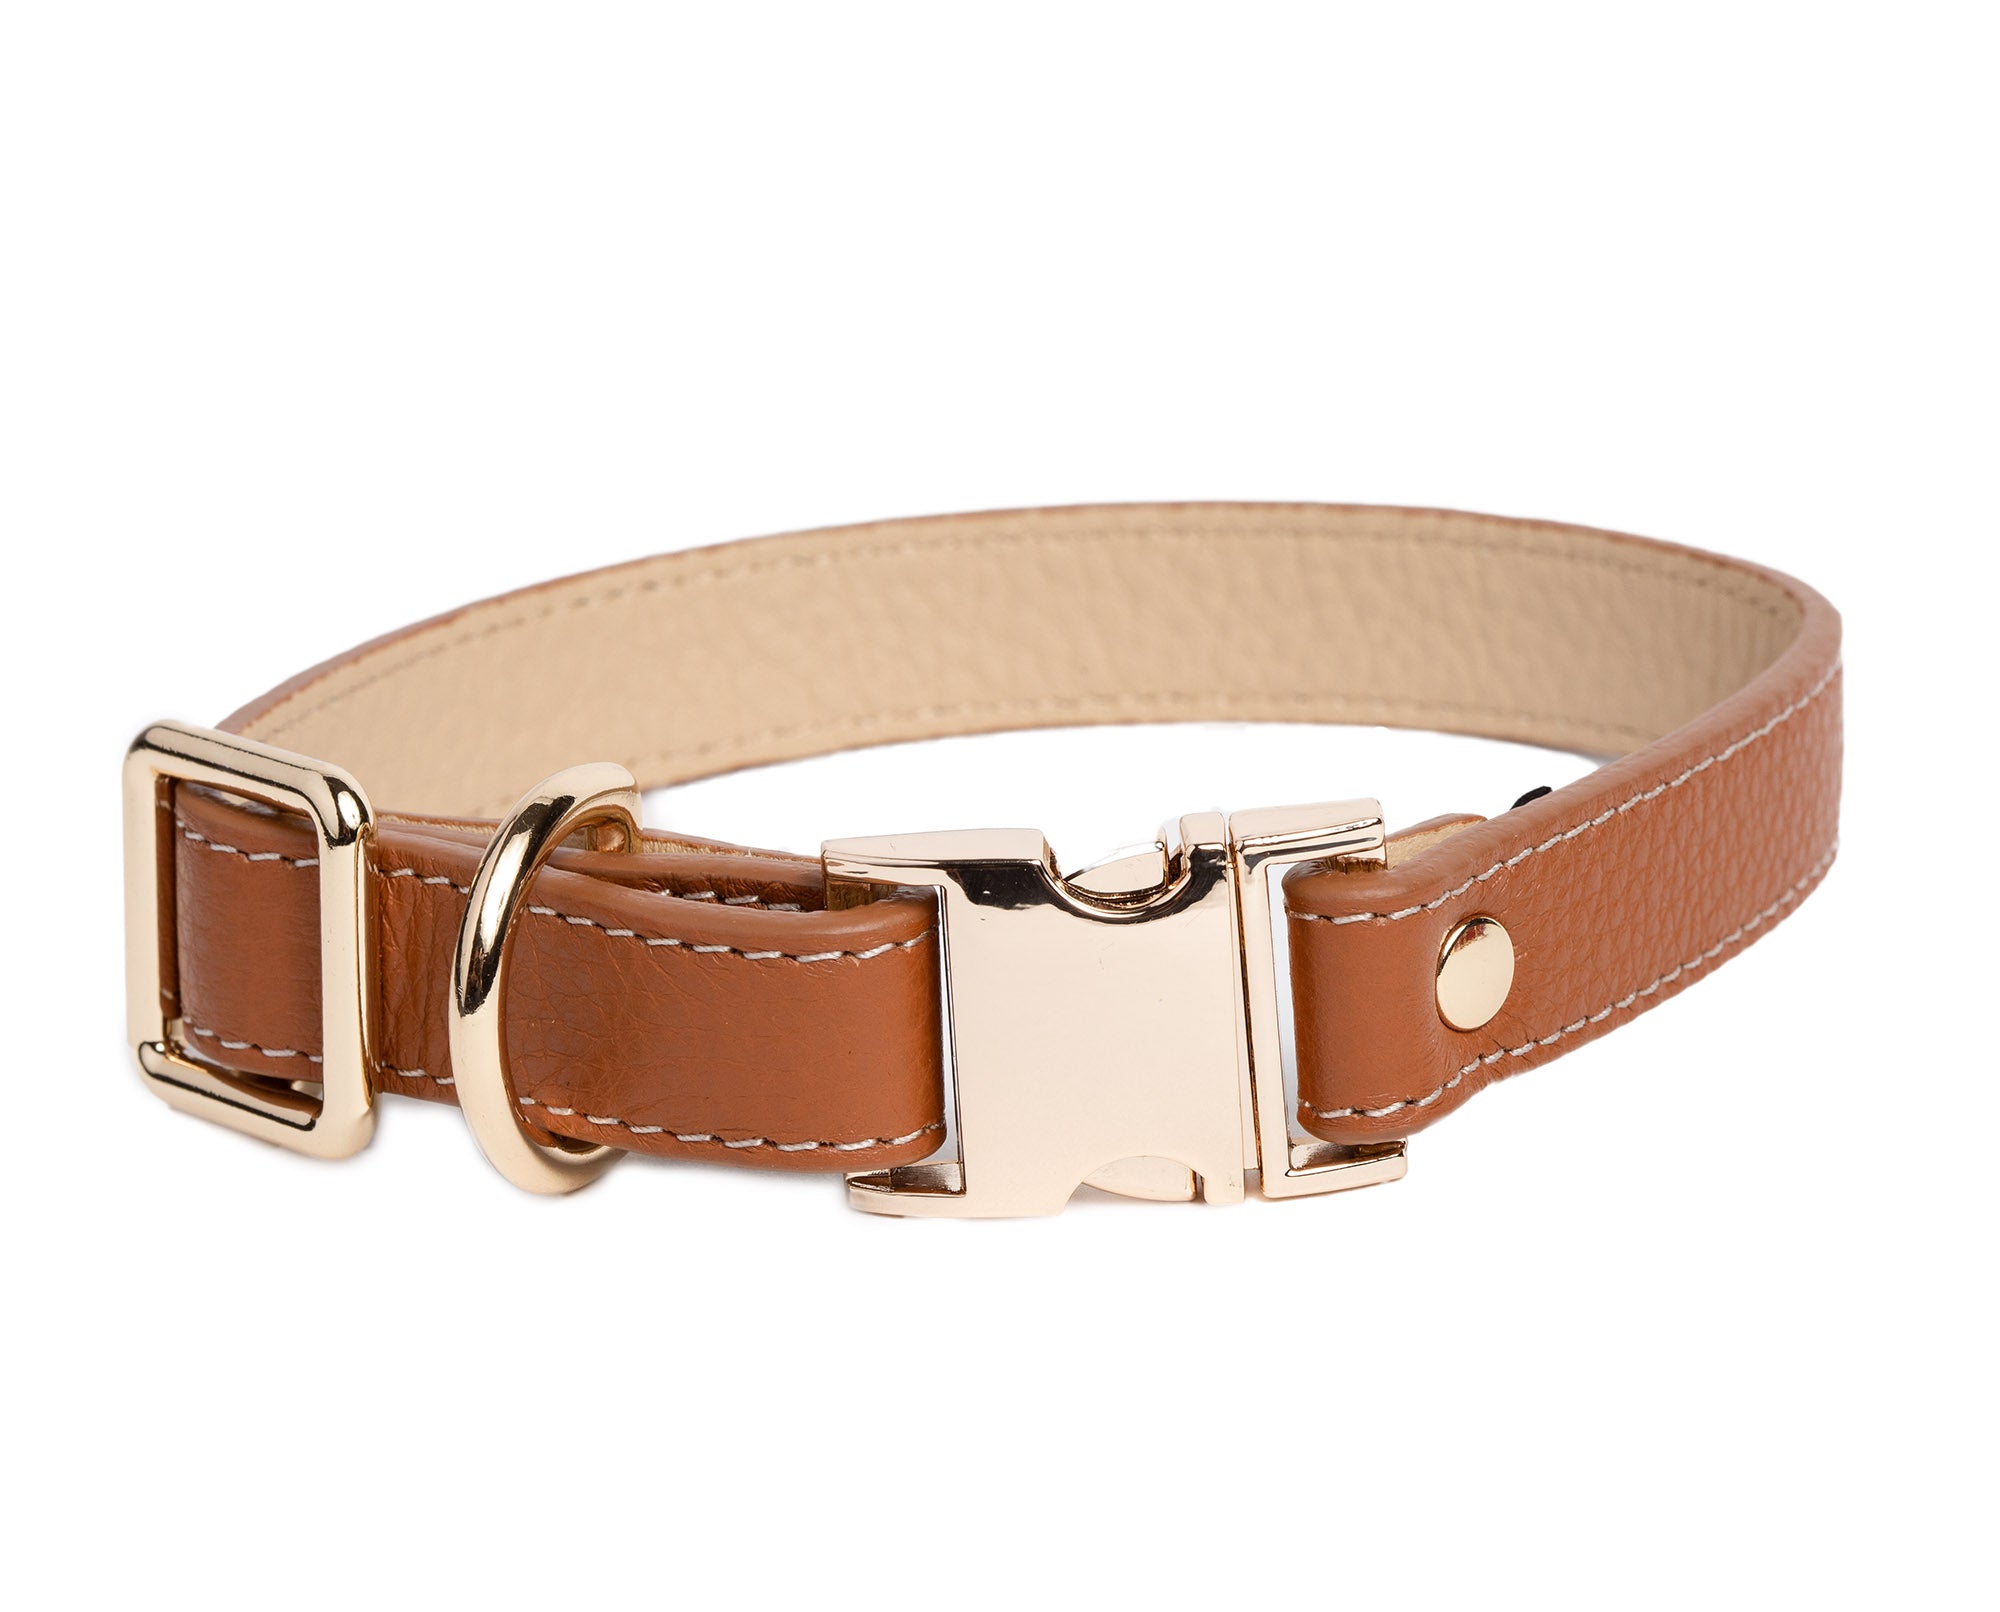 Dog Collar -Canine Styles Fine Leather Buckle Collar and Leads - 3 Color Options